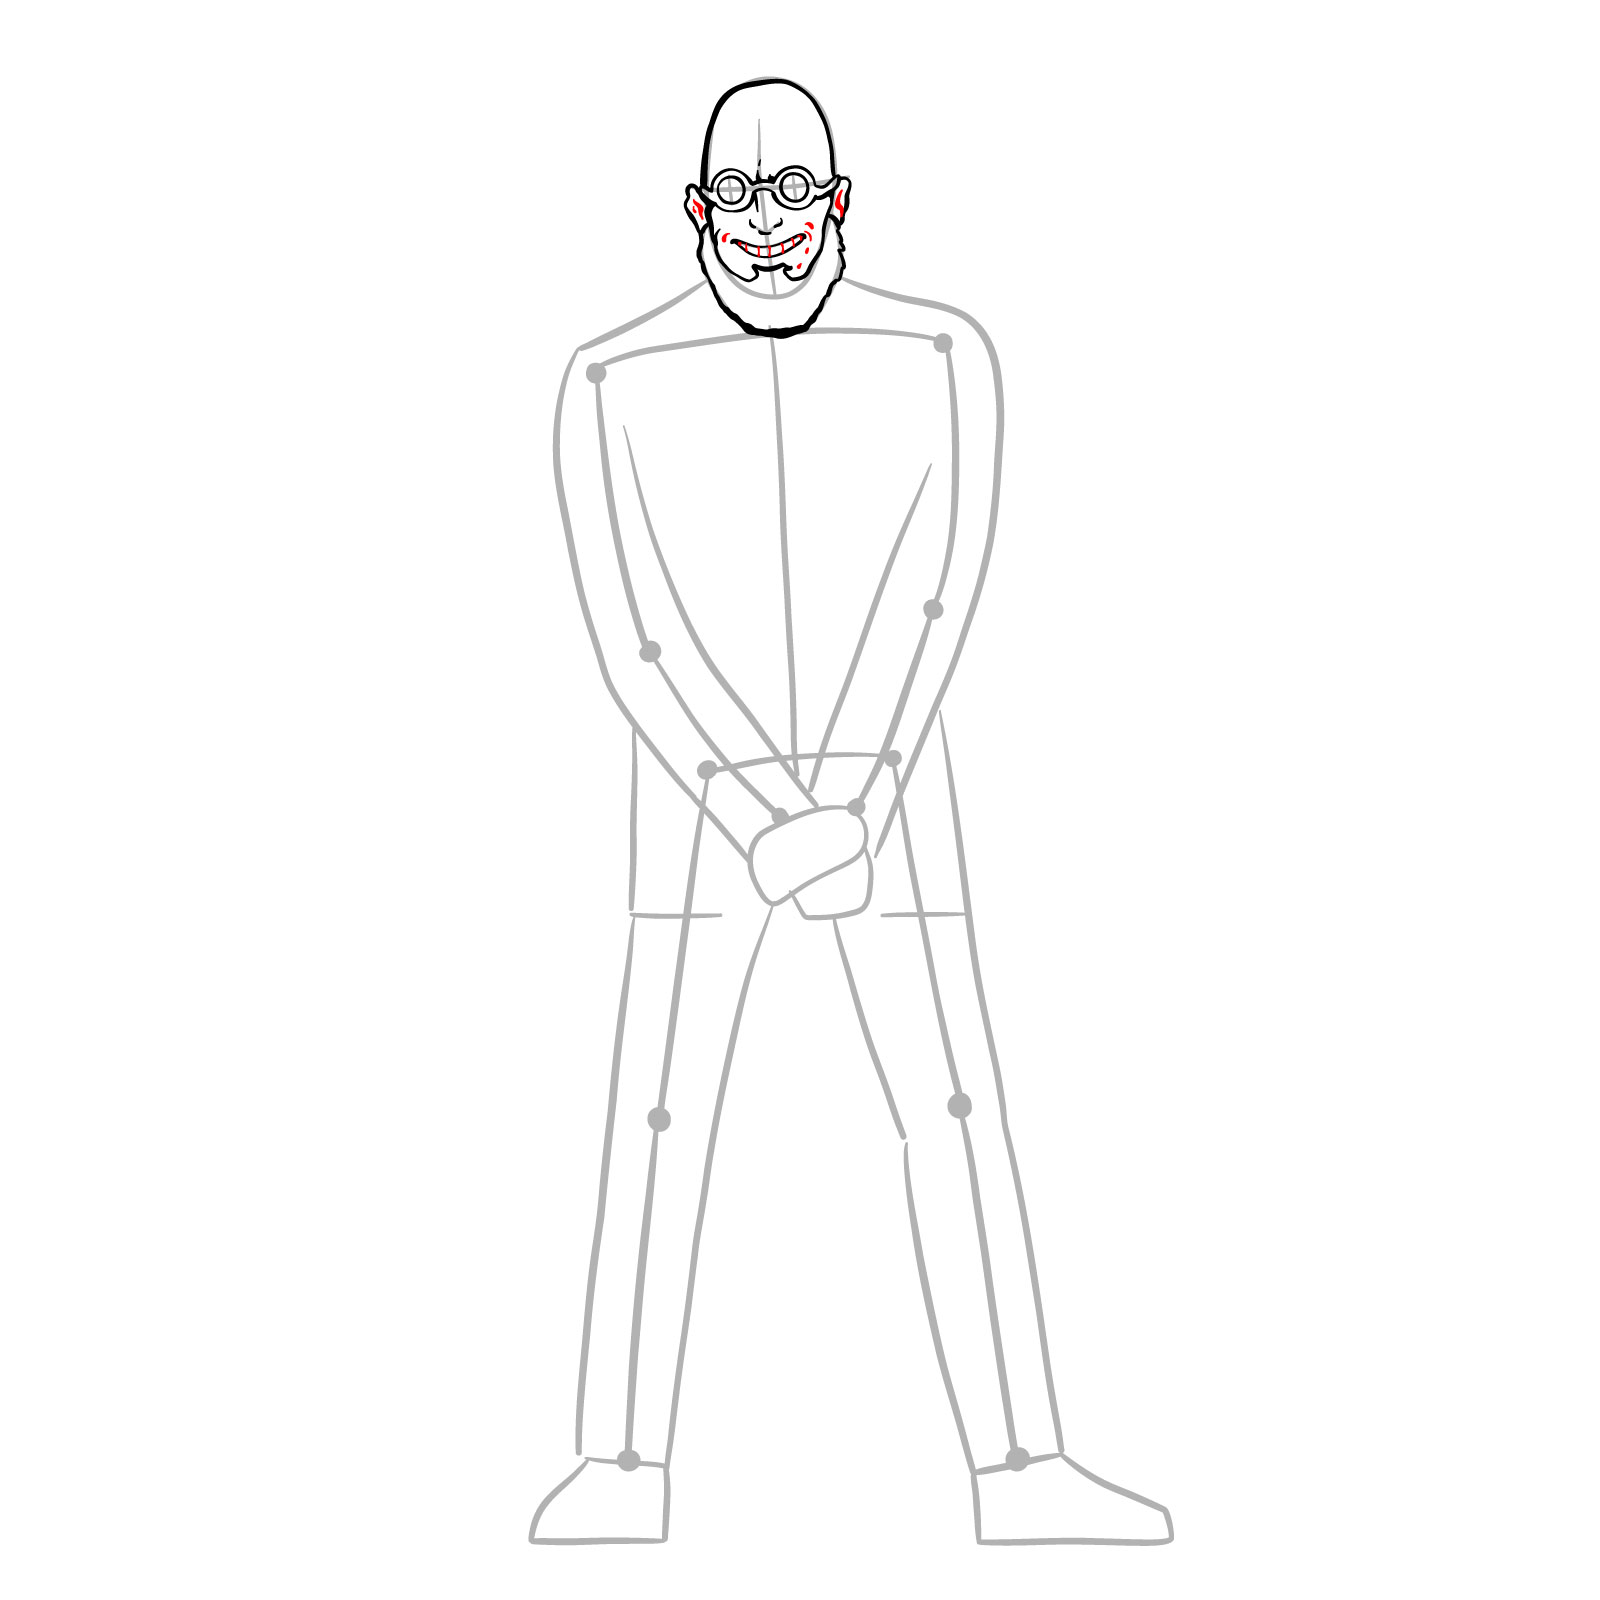 How to draw Dr. Hugo Strange from DC Comics - step 13